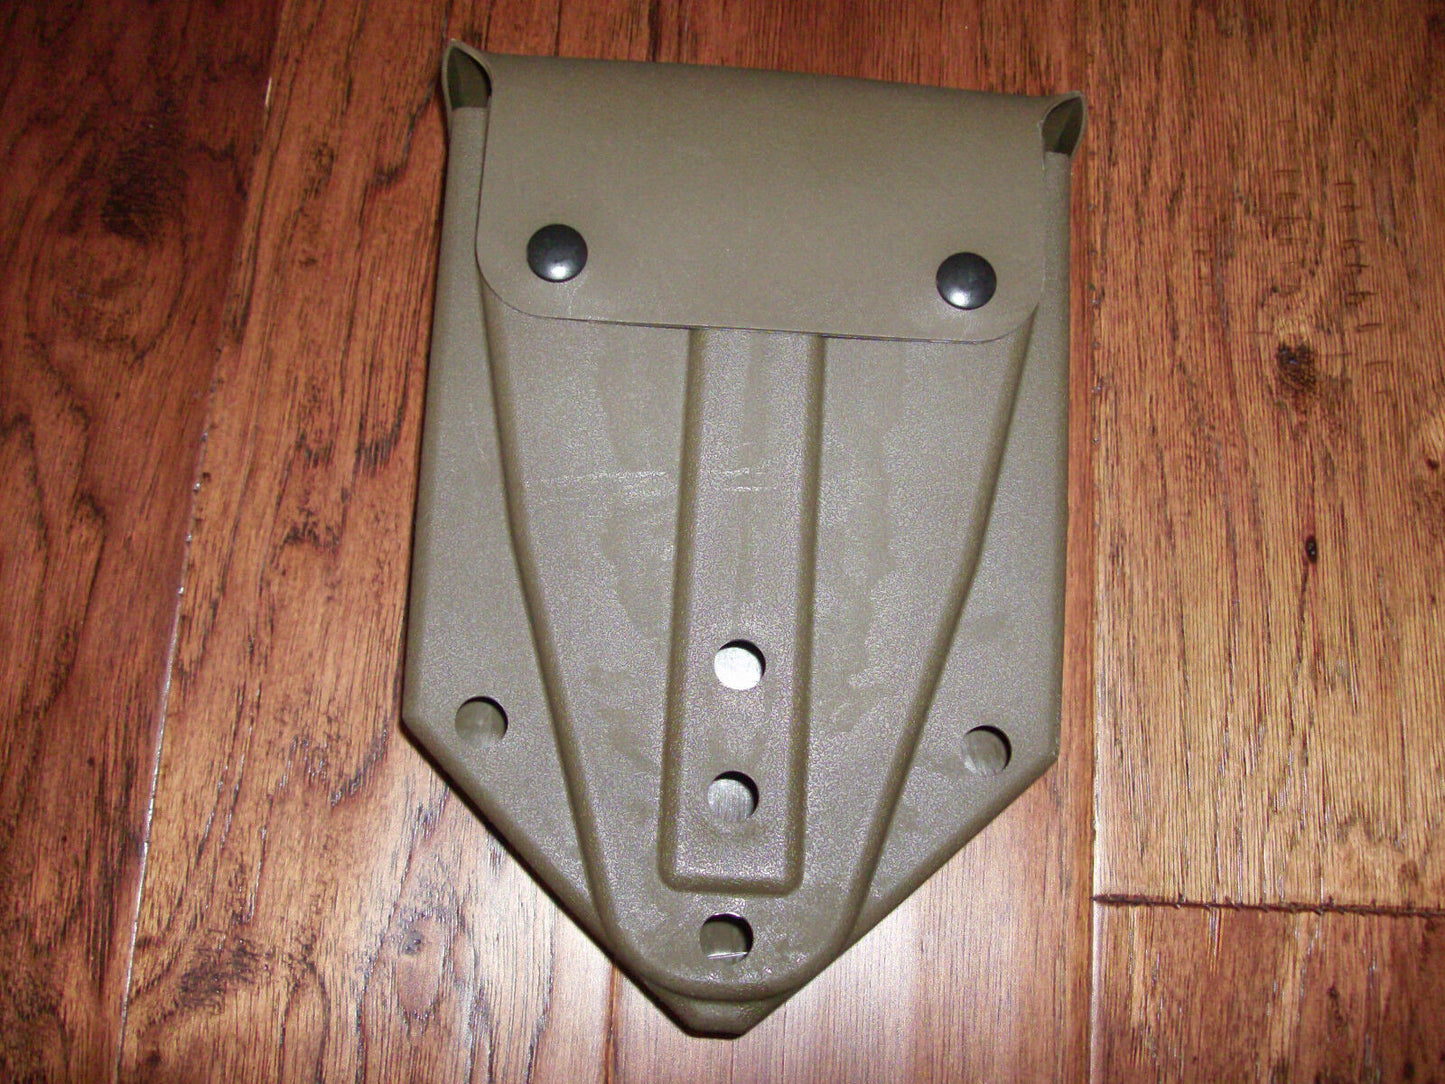 U.S MILITARY ISSUE TRI-FOLD SHOVEL COVER CASE POUCH ALICE GEAR  NEW UNISSUED